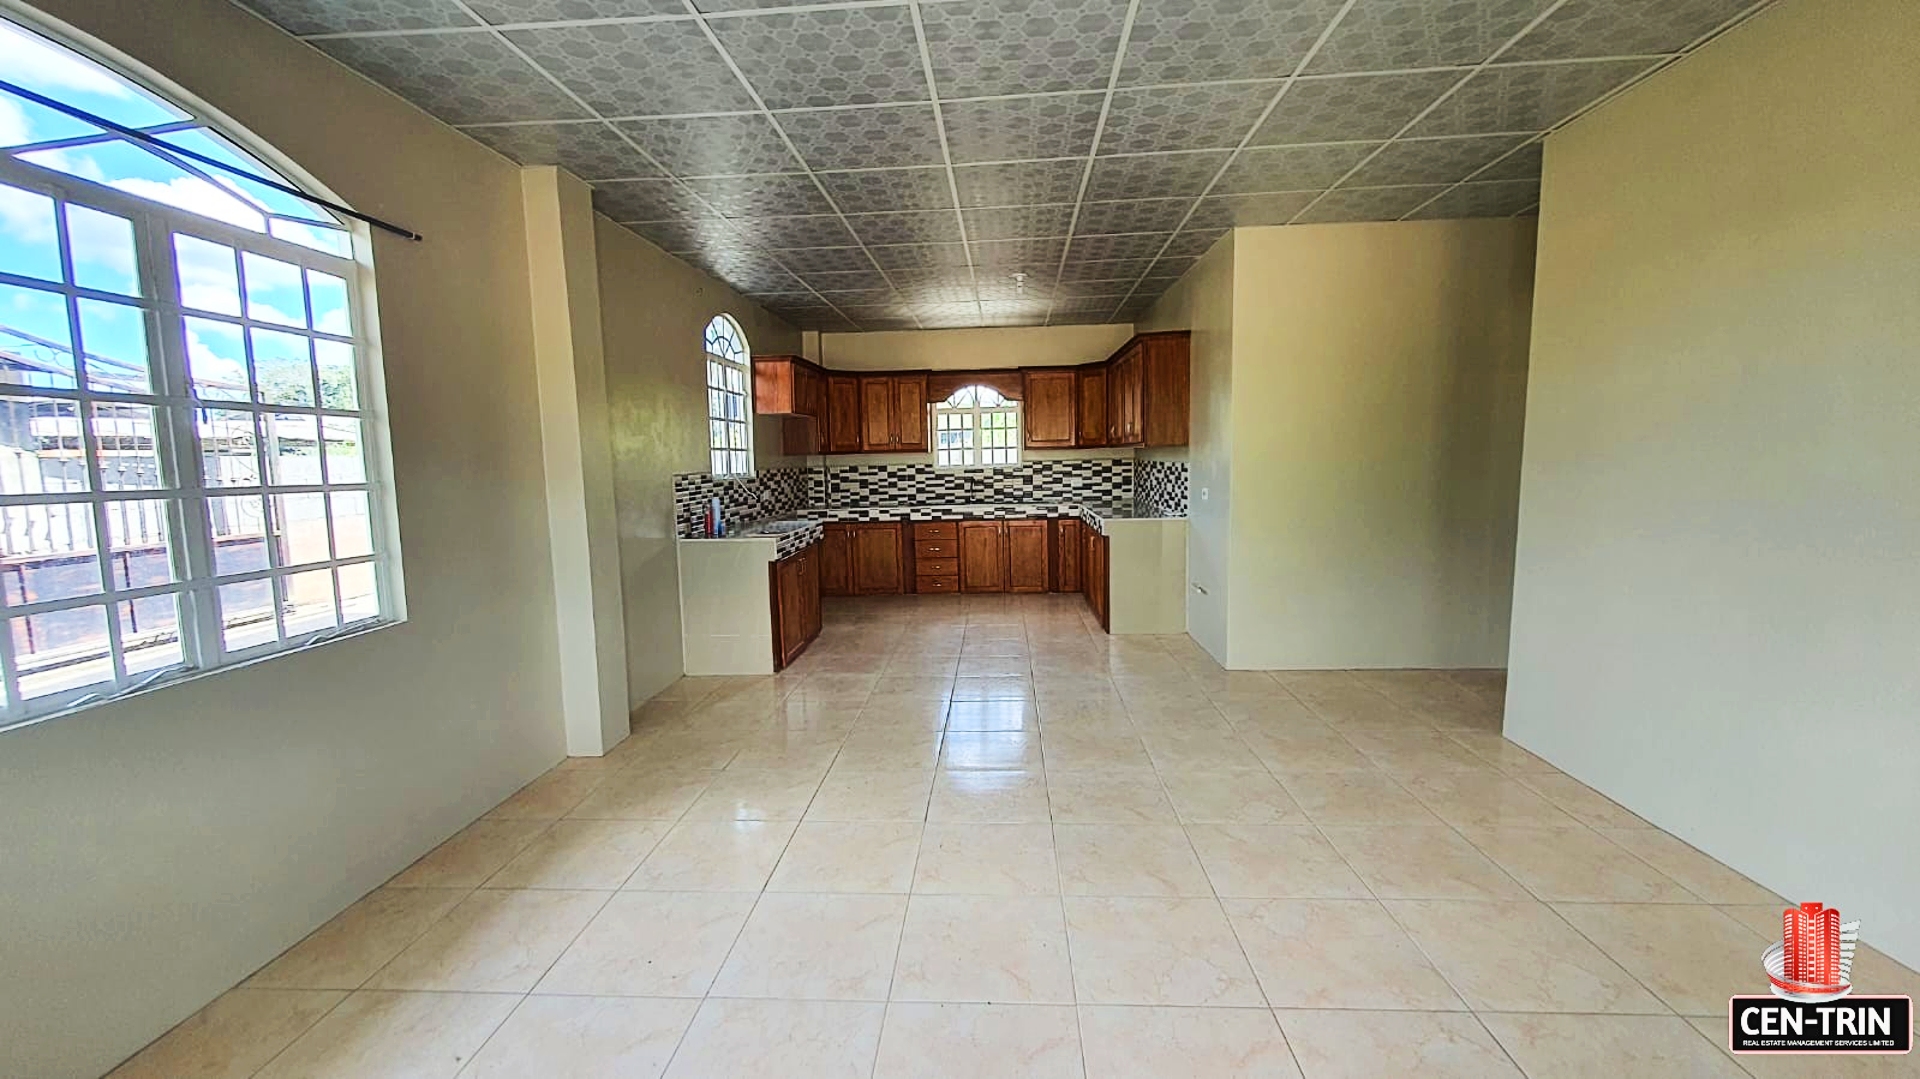 Empty kitchen with wooden cabinets and tiled floor